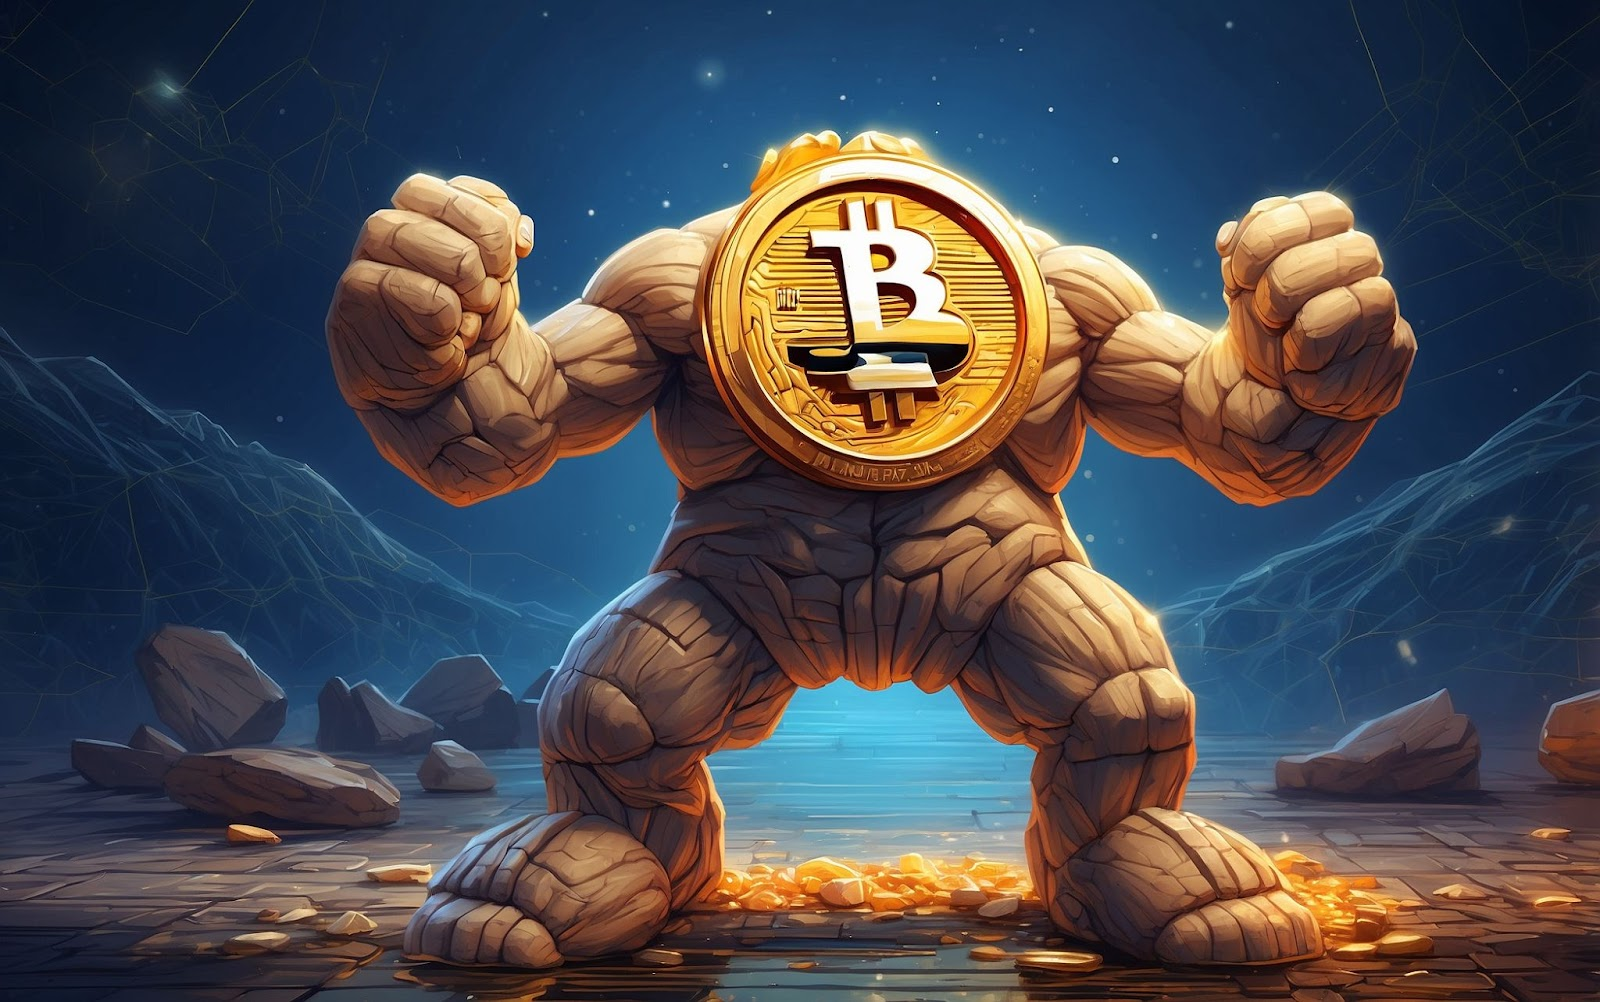 Arbitrum Unlock Sparks Optimism and Caution in Industry;  Coinstore's New Memecoin Primed to Surpass Bonk